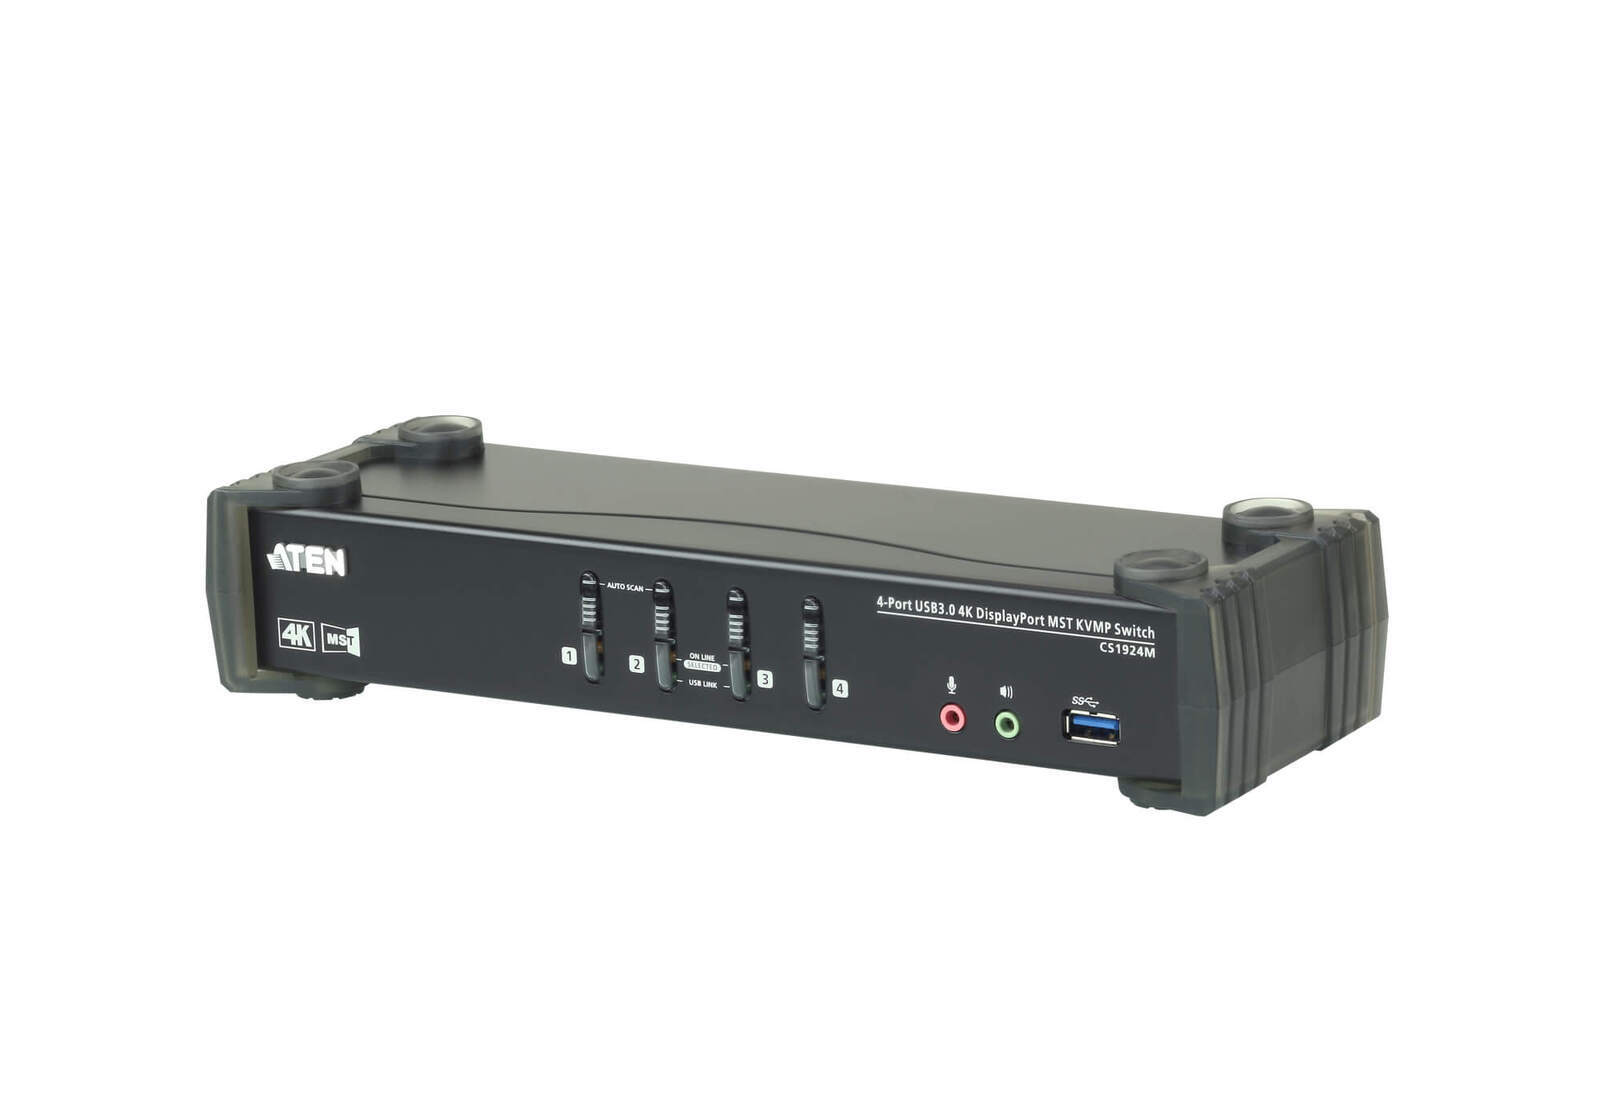 Aten Desktop KVMP Switch 4 Port Single to Dual Display 4k DisplayPort MST w/ audio, Cables Included, 2x USB Port, Selection Via Front Panel